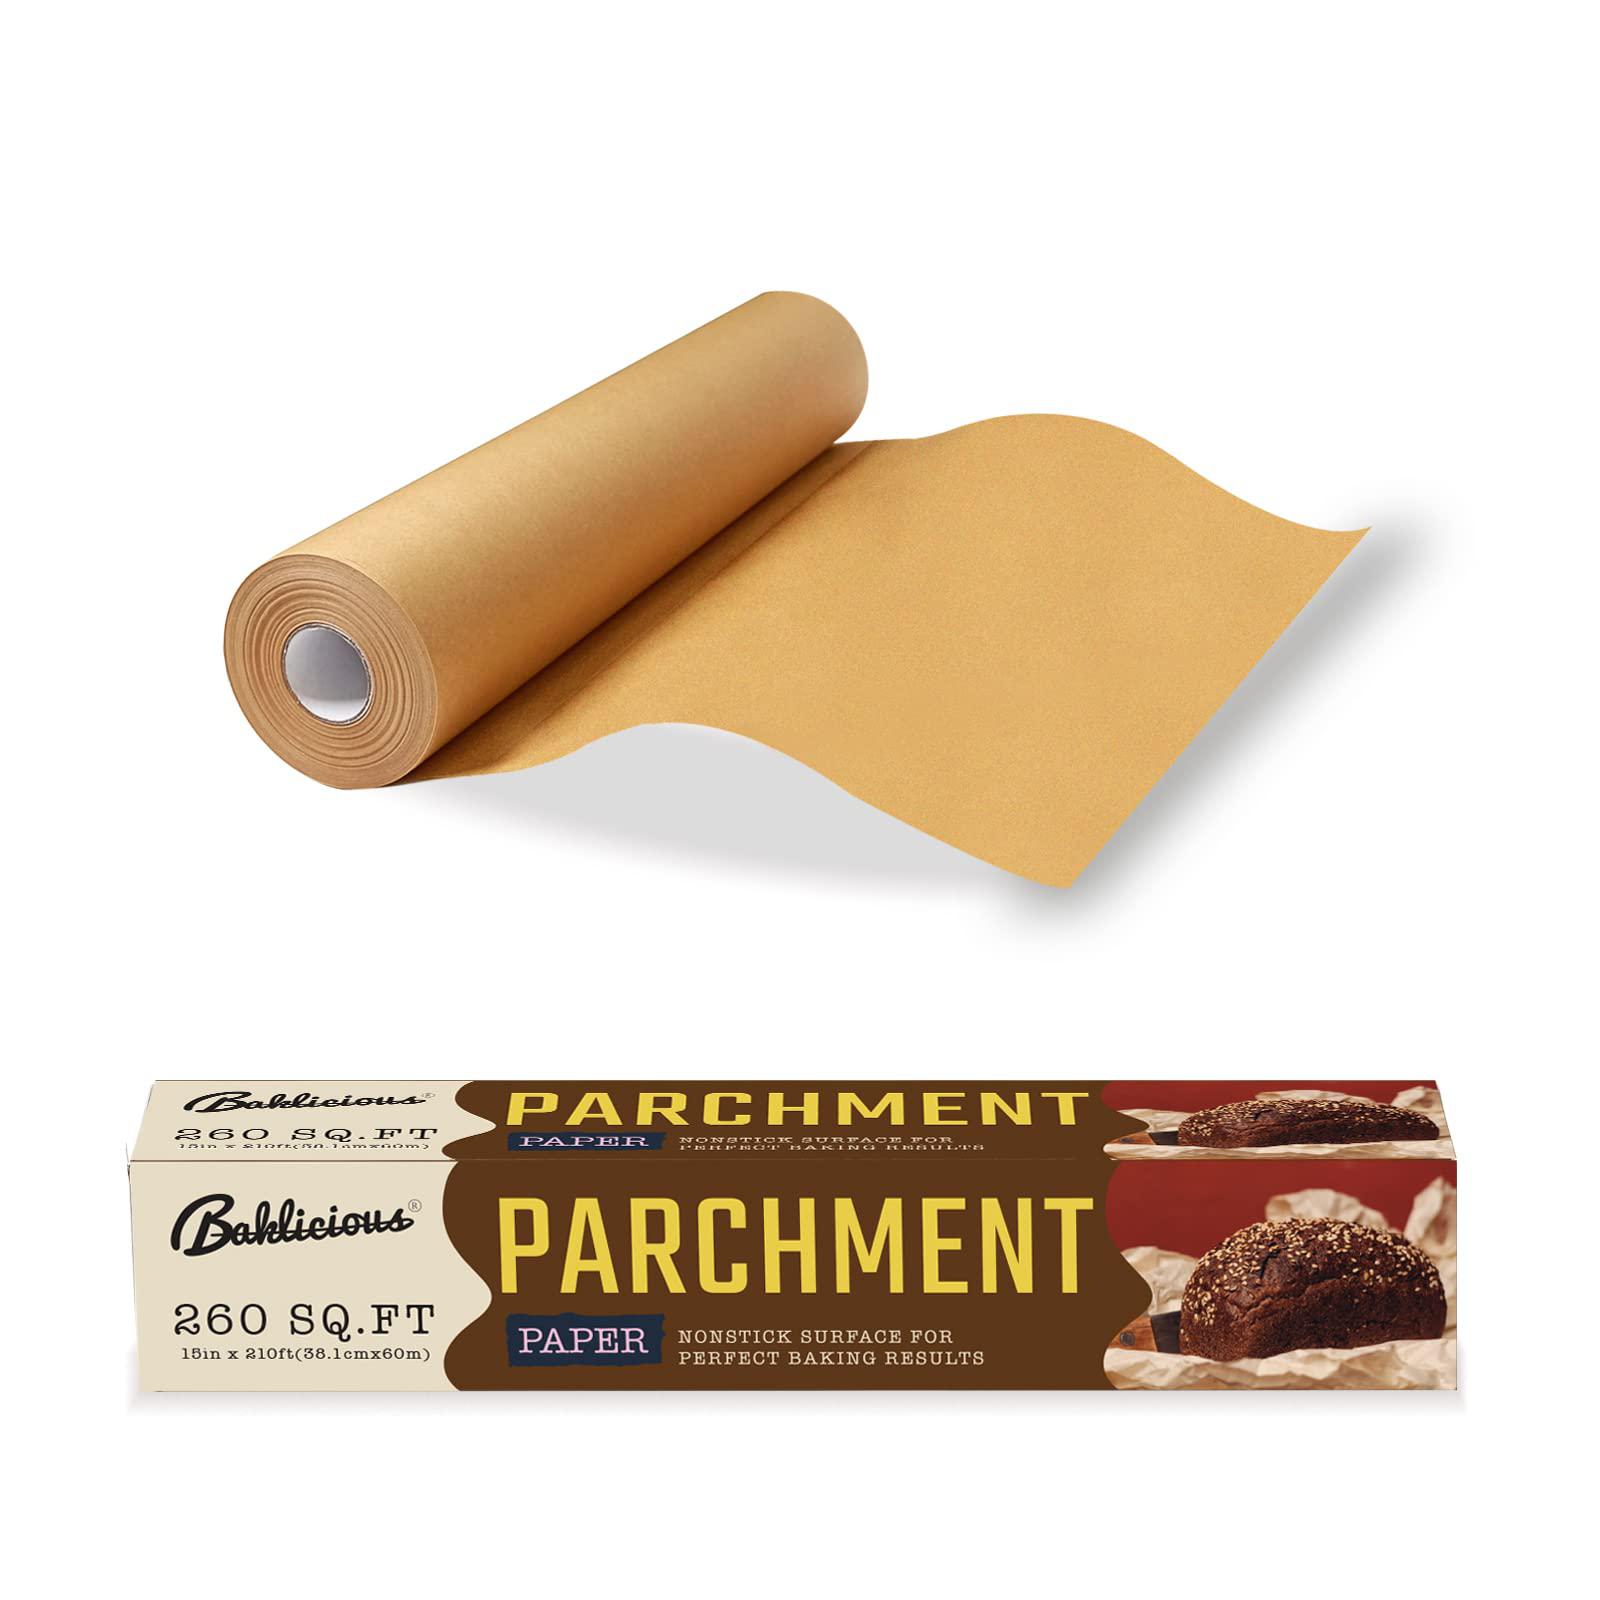 BAKLICIOUS unbleached parchment paper roll for baking, 15 in x 210 ft, 260 sq.ft, non-stick baking paper, food grade cooking paper for b